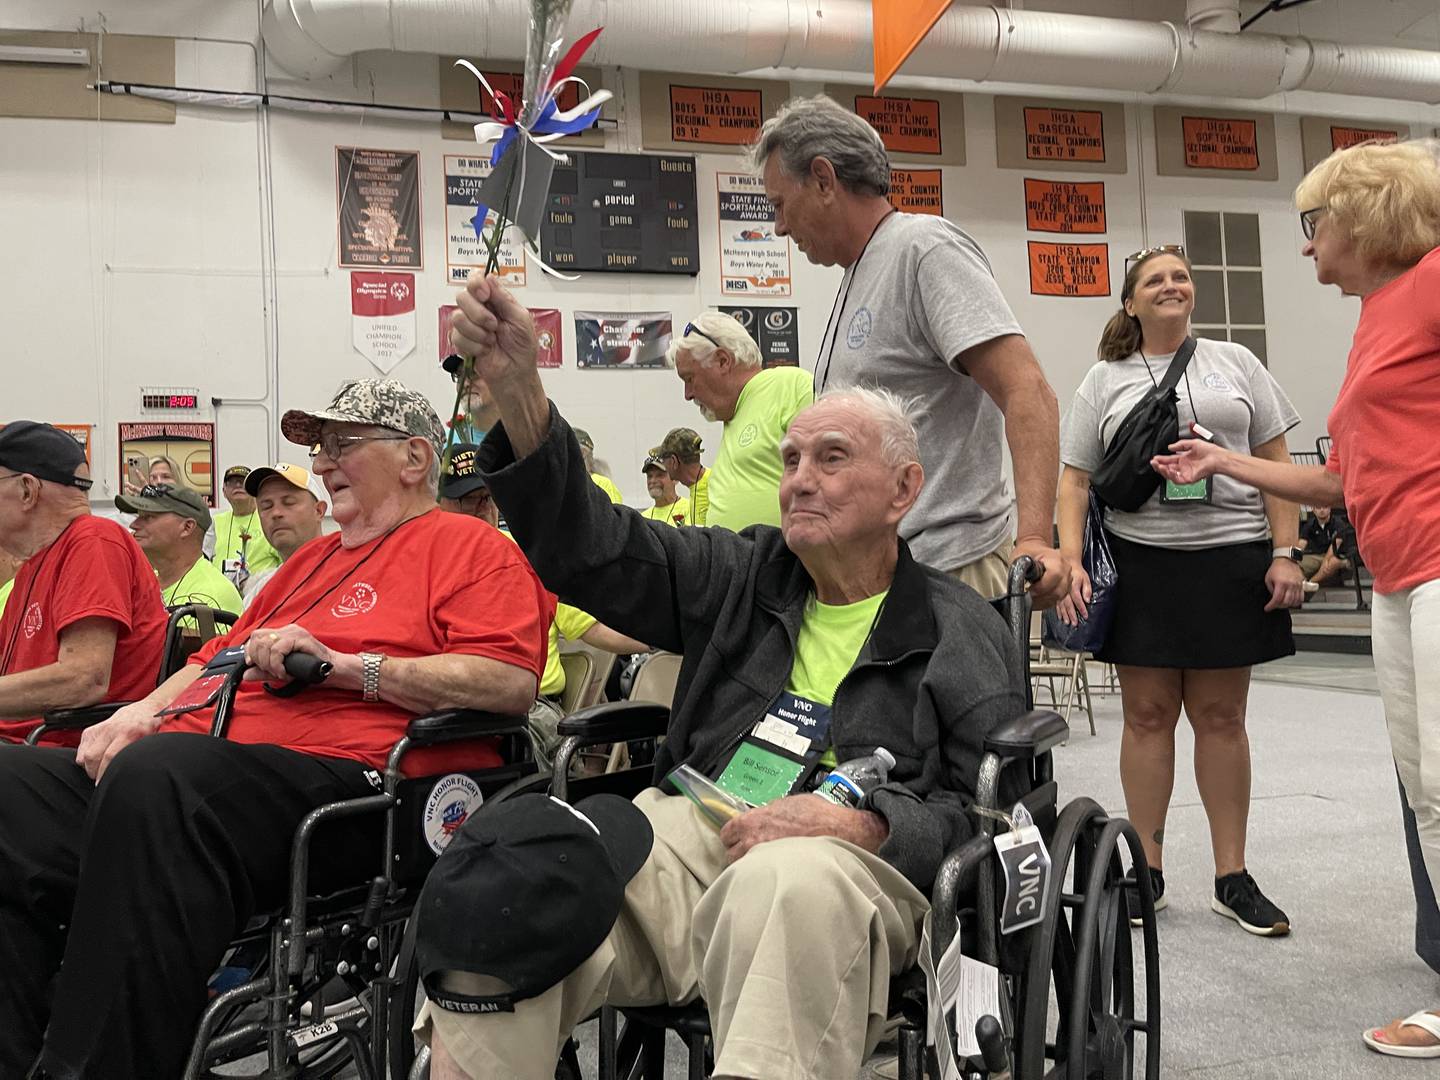 Bill Sensor, an army veteran, waves and cheers after being welcomed into McHenry High School. Sensor was one of 51 veterans who went on the Honor Flight over the weekend to visit war memorials in Washington D.C., Sunday, Aug. 28, 2022, and were welcomed home at McHenry High School.